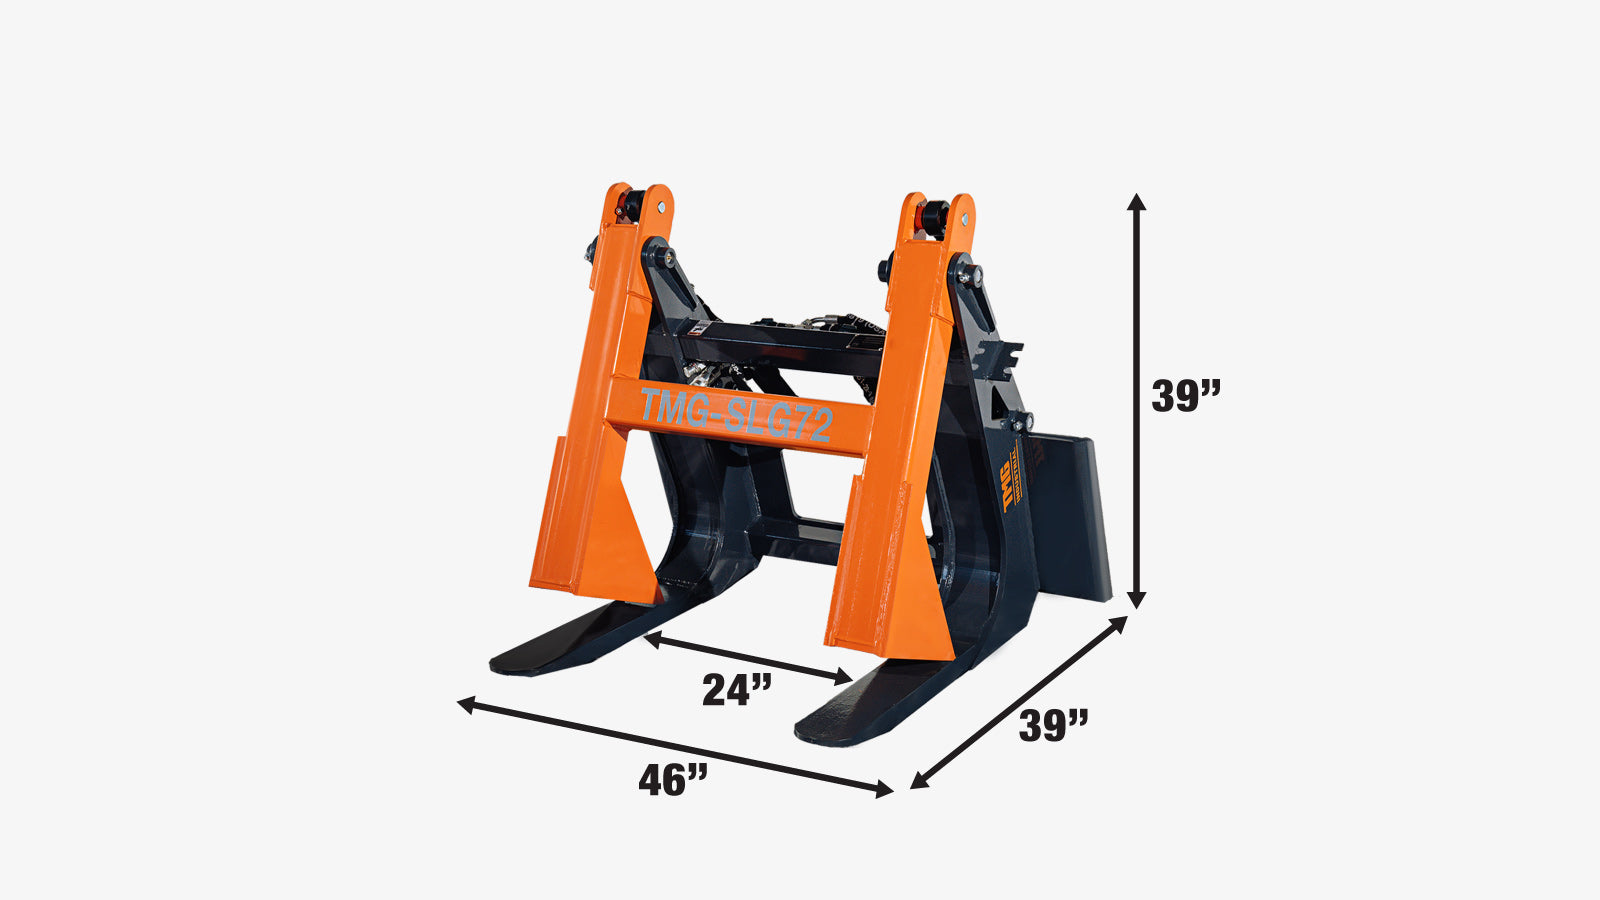 TMG Industrial 46” Skid Steer Log Grapple Attachment, 36” Claw Opening, 6400 lb Grap Capacity, TMG-SLG72-specifications-image